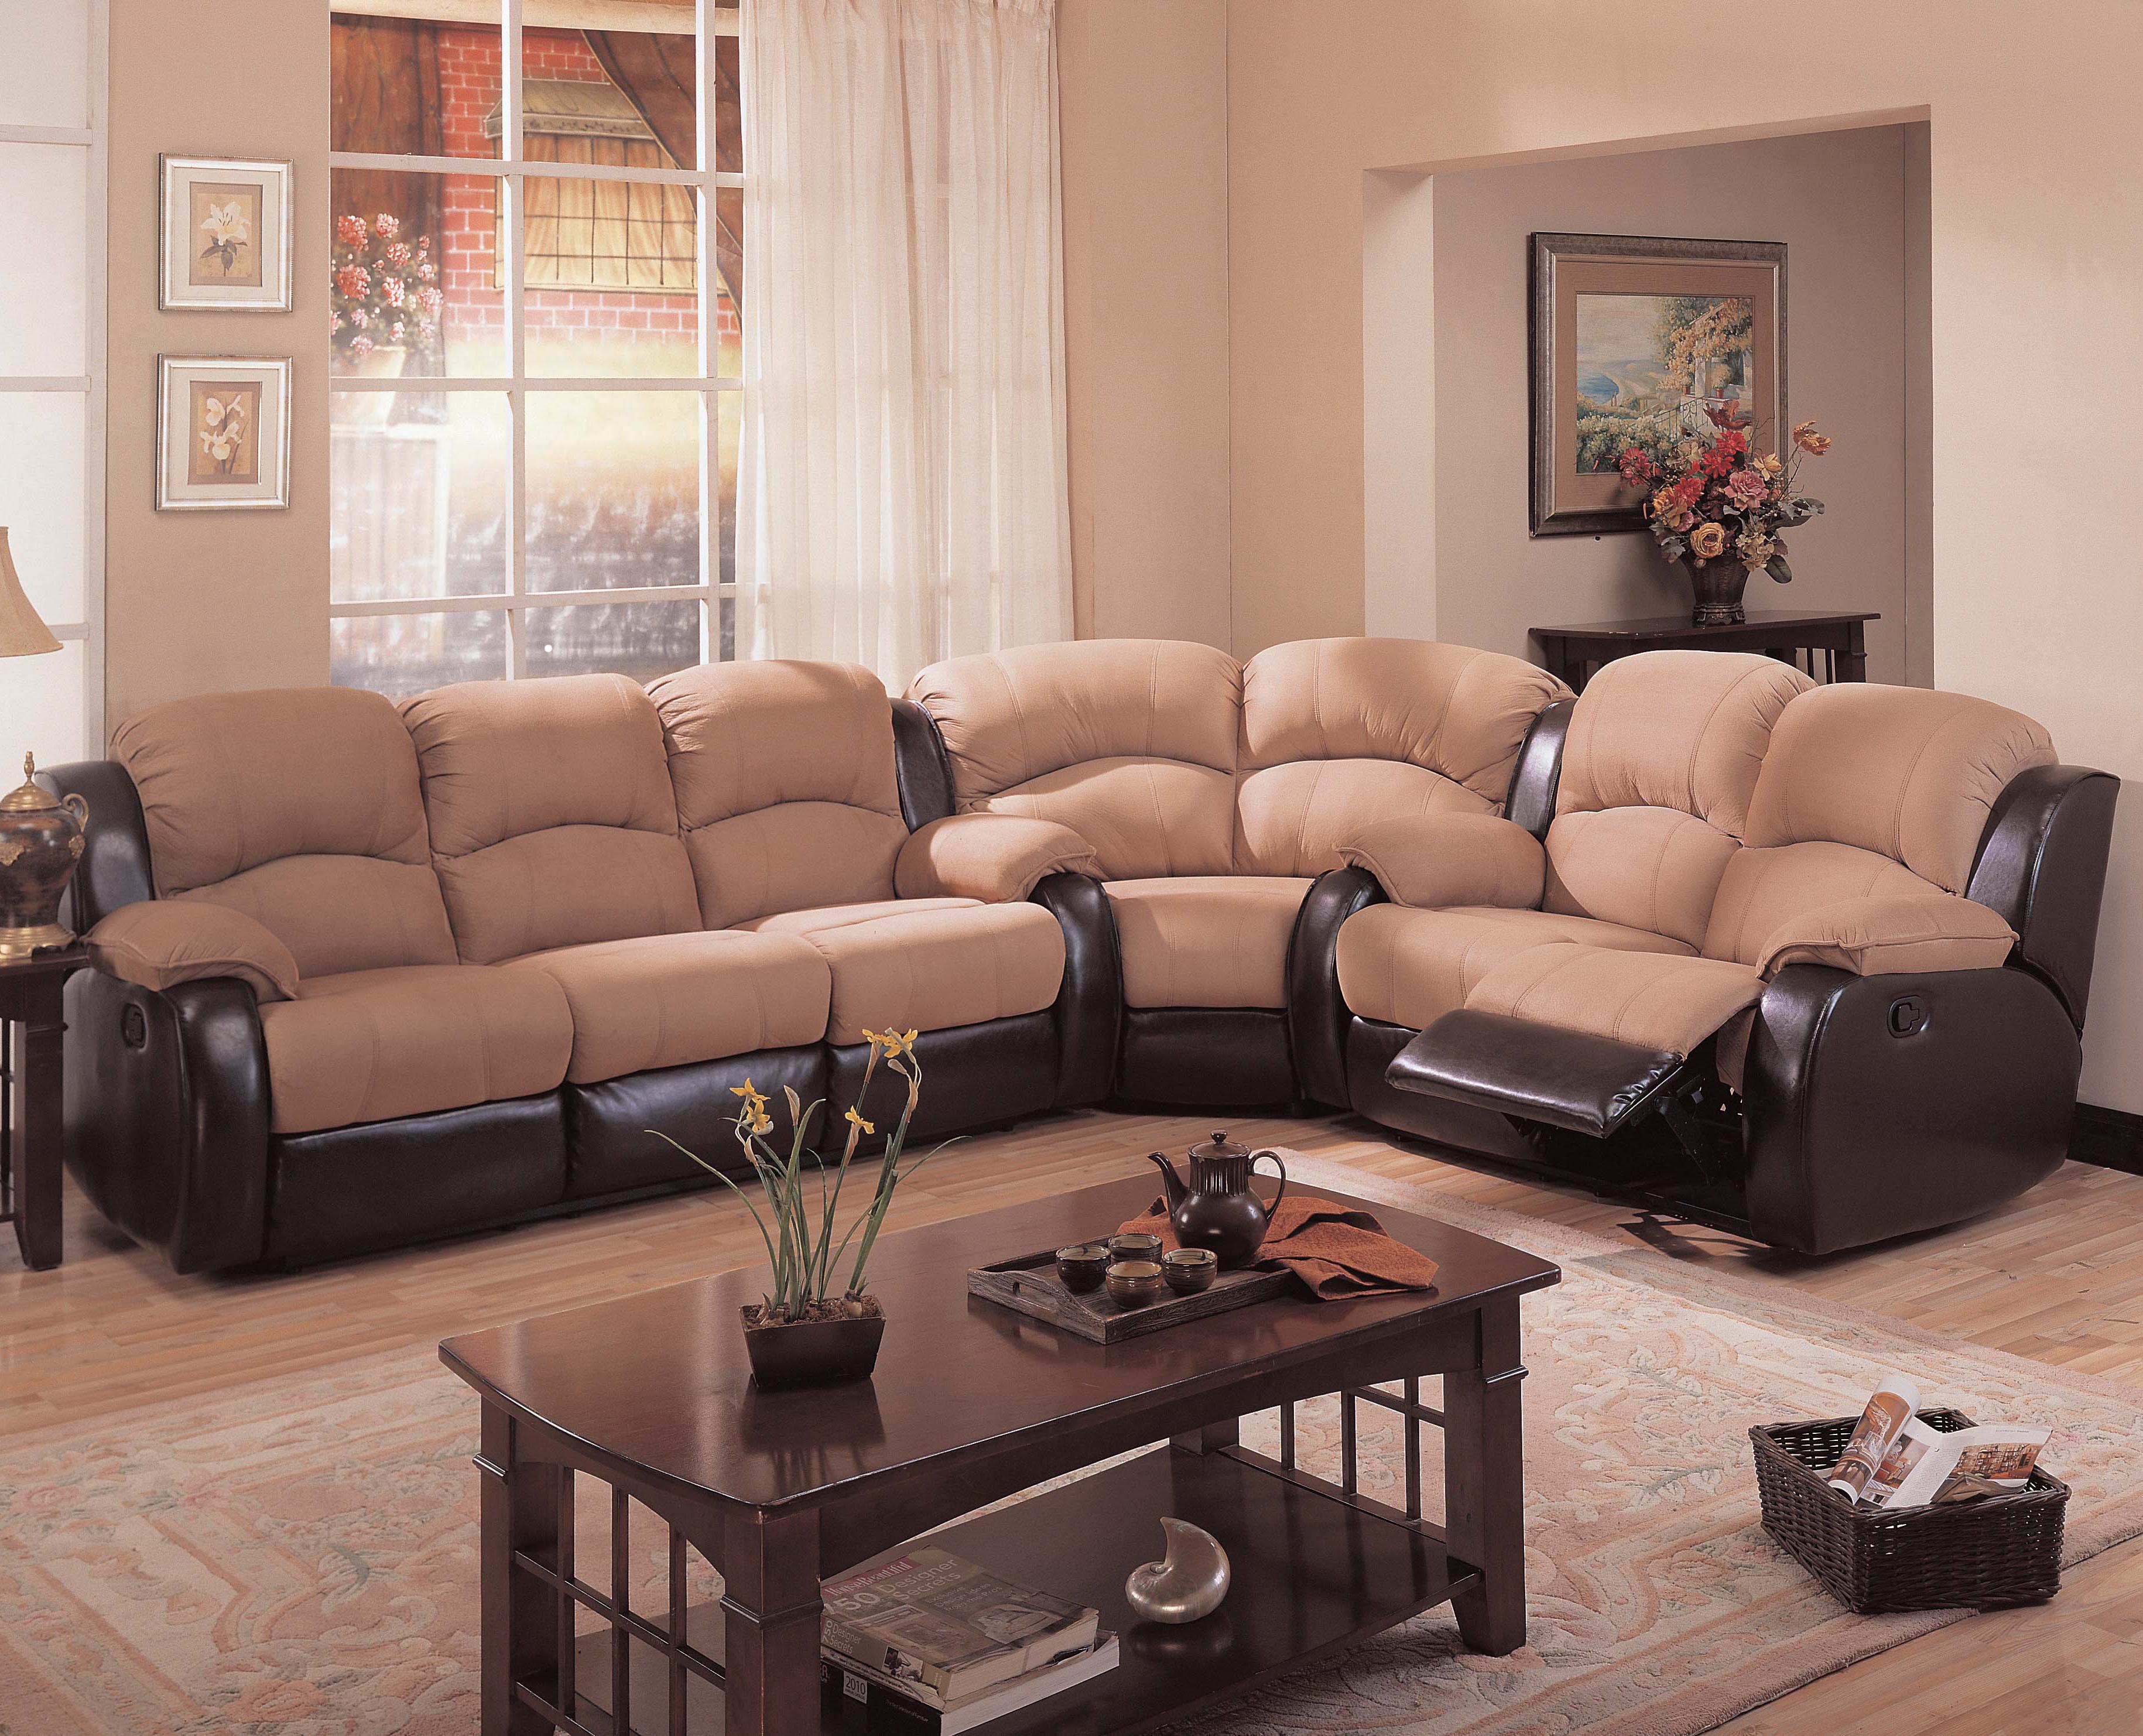 Microfiber Sectional Couch With Recliner Living Room Furniture Reclining Sofa Leather Recliner Sectional Corner Pmdidyu  